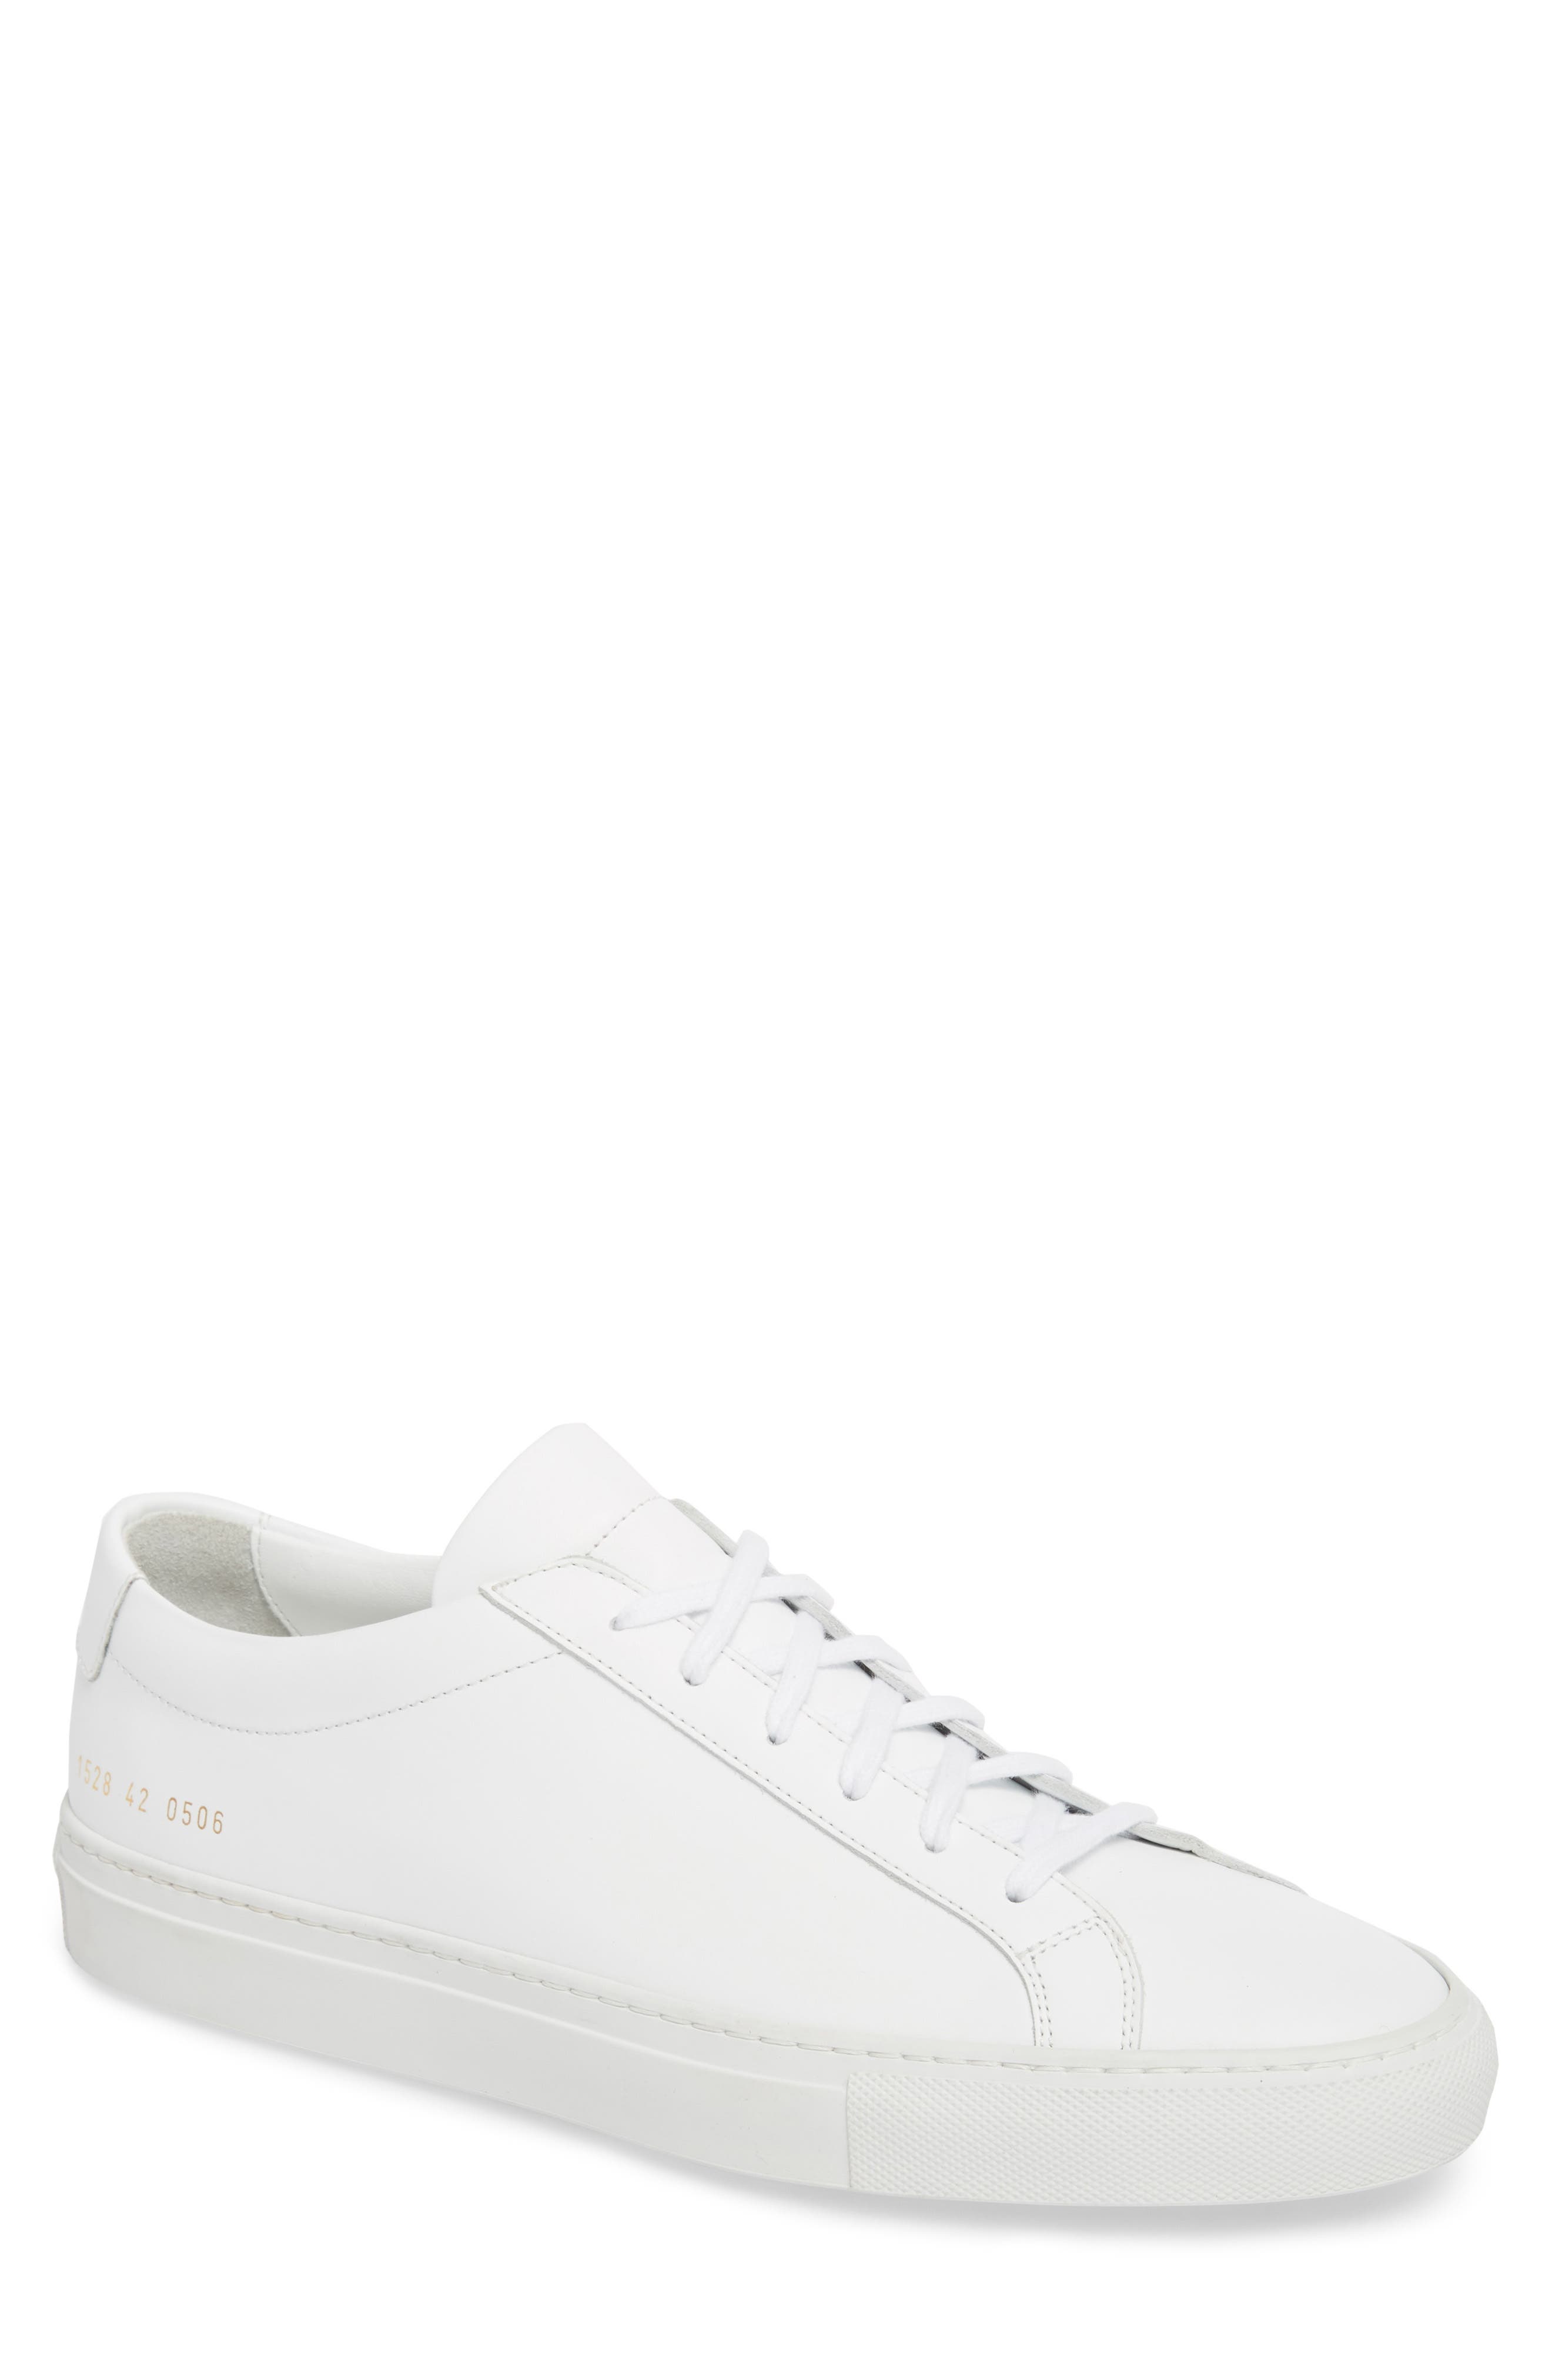 common projects achilles low white